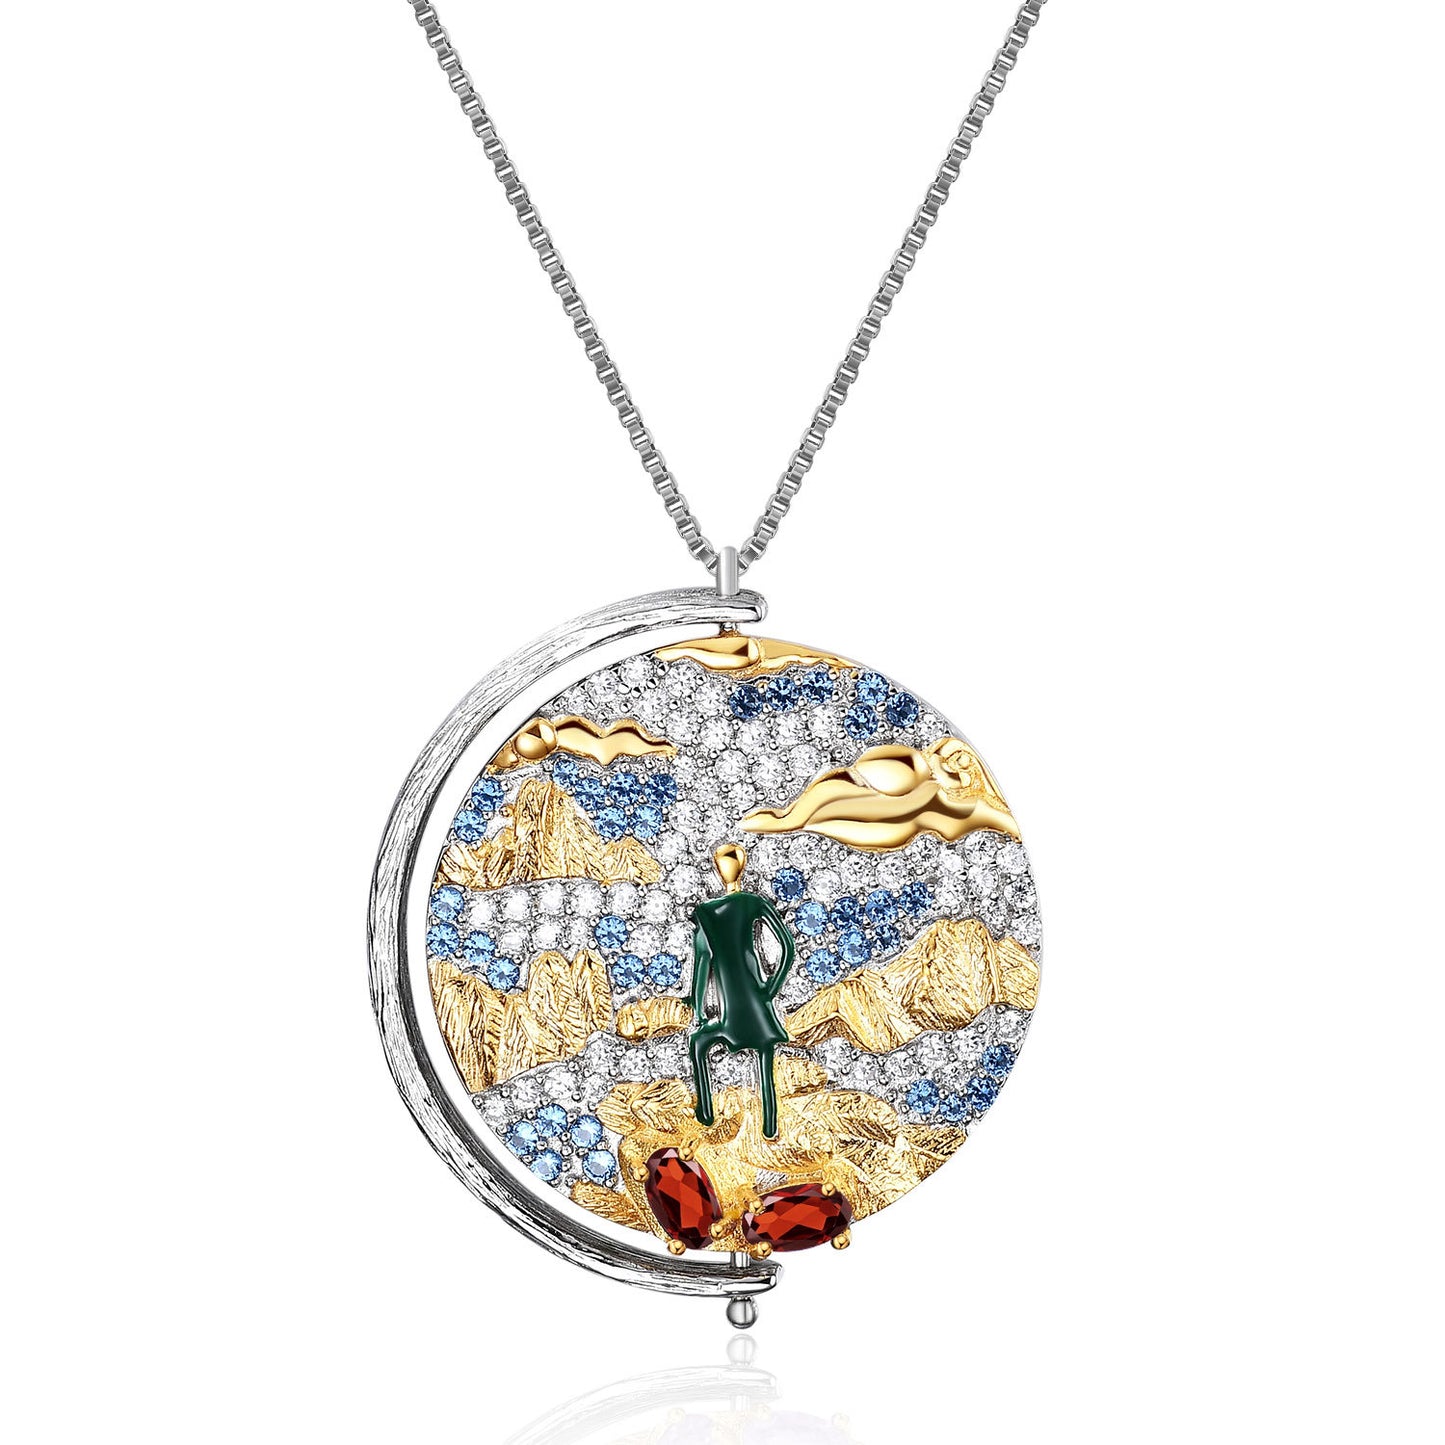 Italian Craft Abstract Pattern Vintage Jewelry Design Inlaid Colourful Gemstone Pendant Silver Necklace for Women